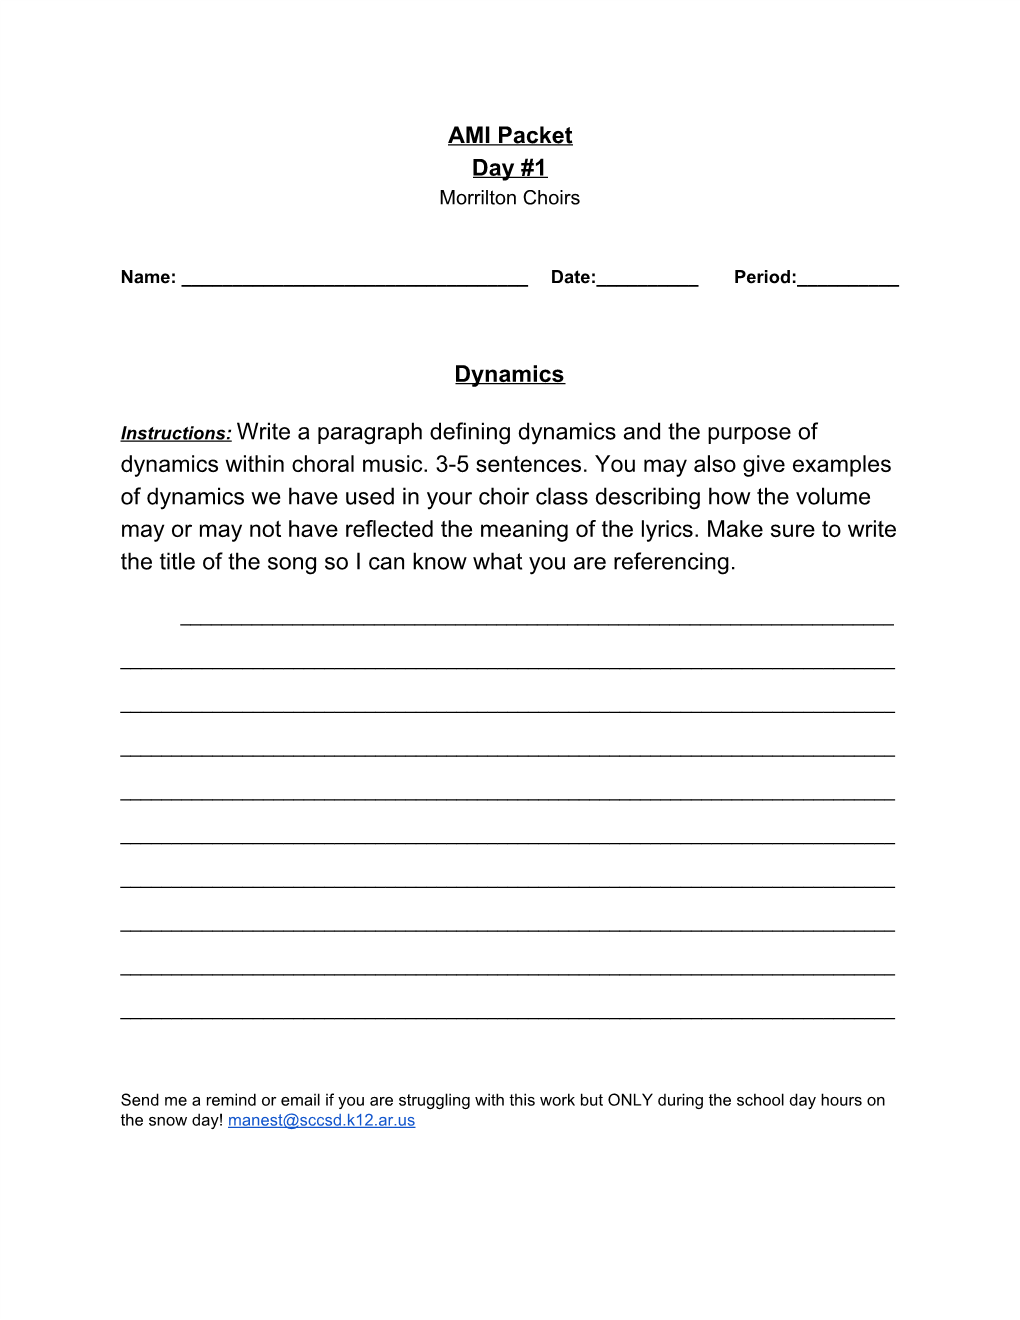 AMI Packet Day #1 Dynamics Instructions:​ ​Write a Paragraph